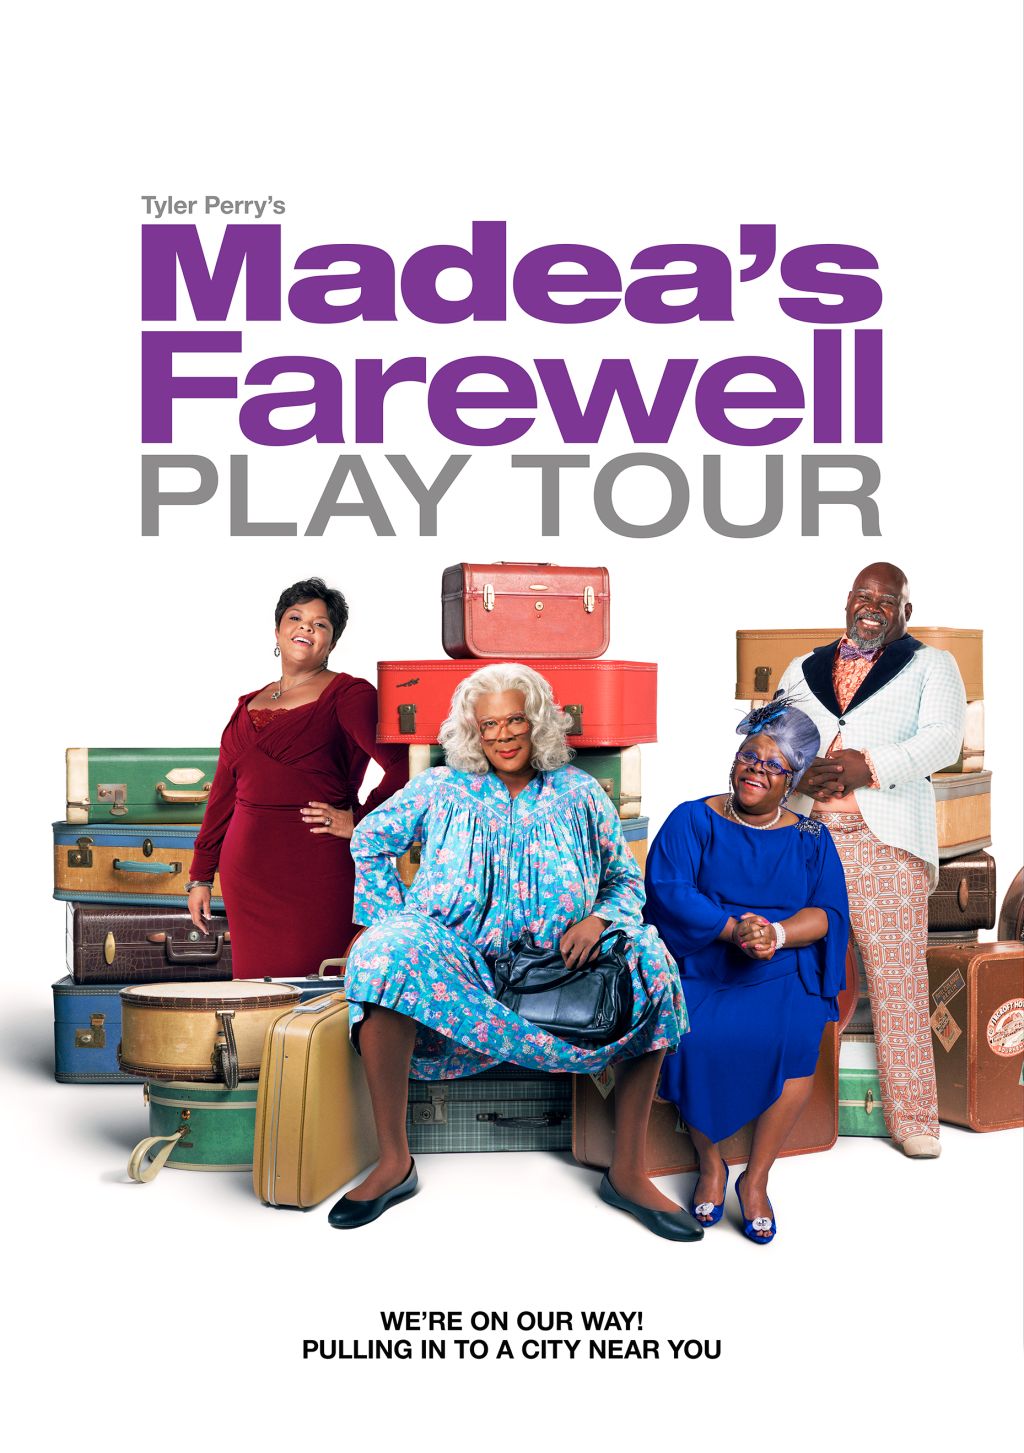 Tyler Perry's Madea's Farewell Play Tour (Indy)